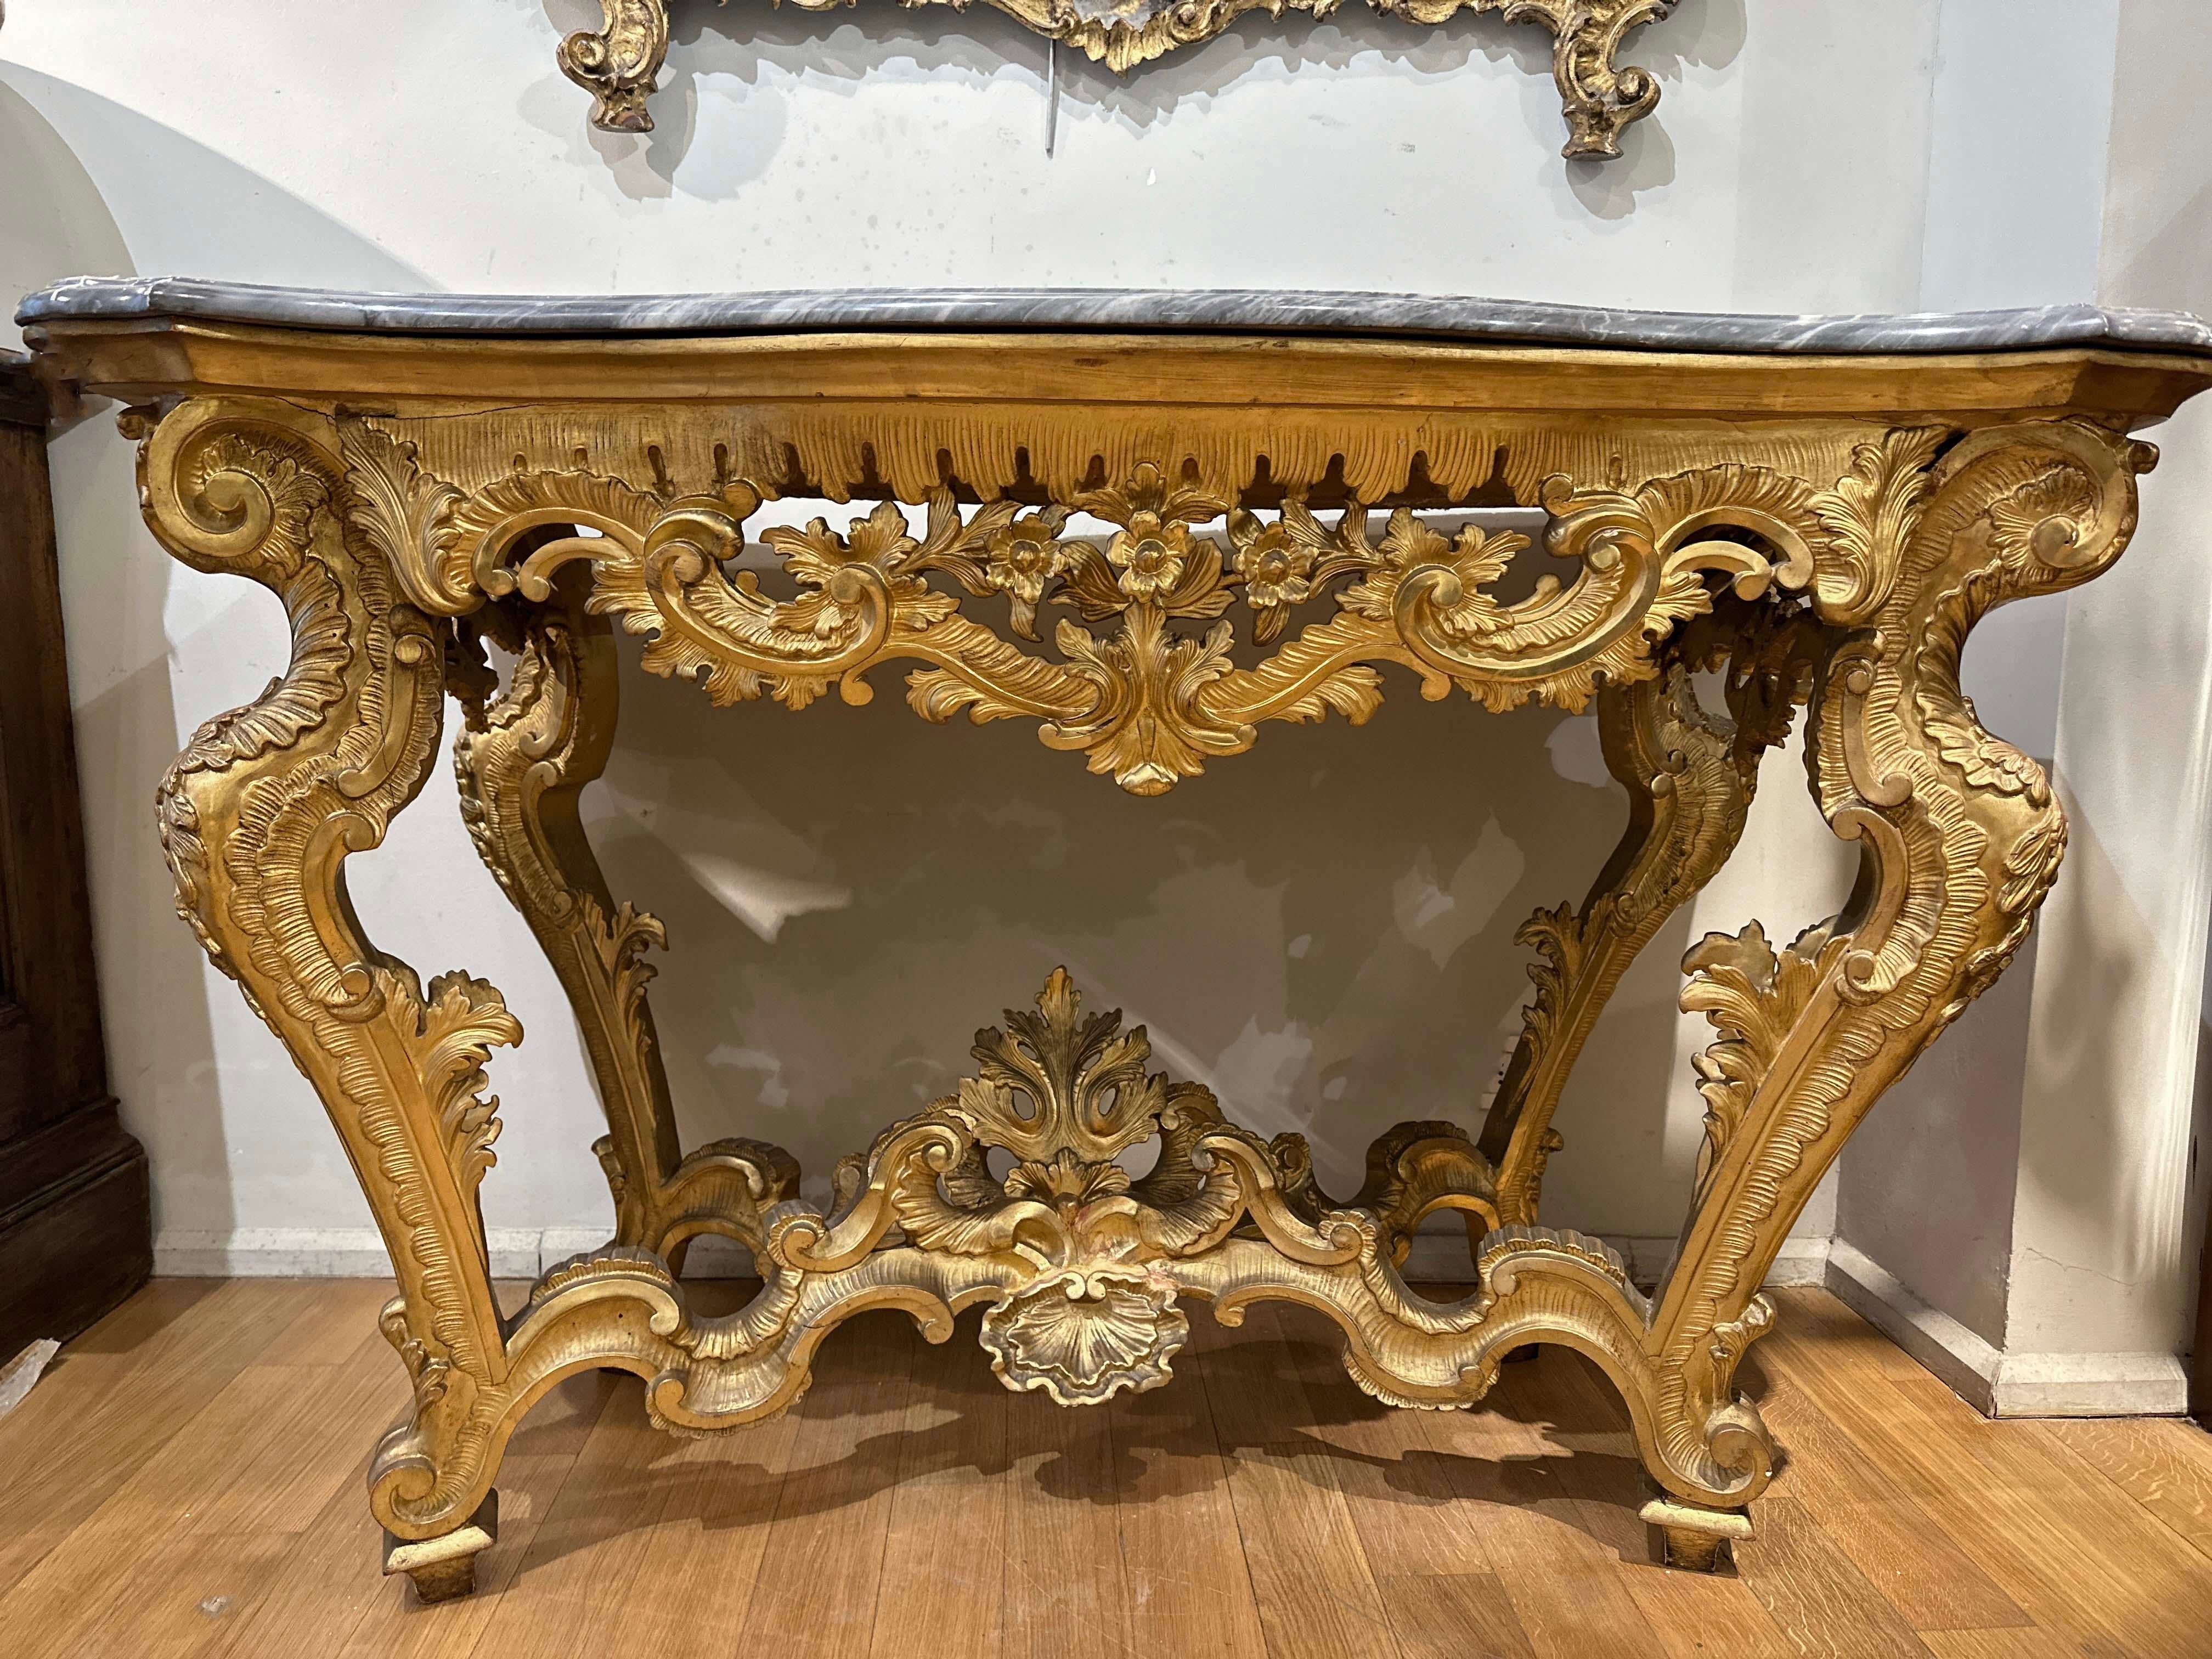 This mid-18th century Tuscan console, belonging to the Louis XV period, is a piece of furniture of great elegance. Expertly crafted from fine pine wood, it was carved and gilded with extreme care, giving the piece a refined appearance. The legs of